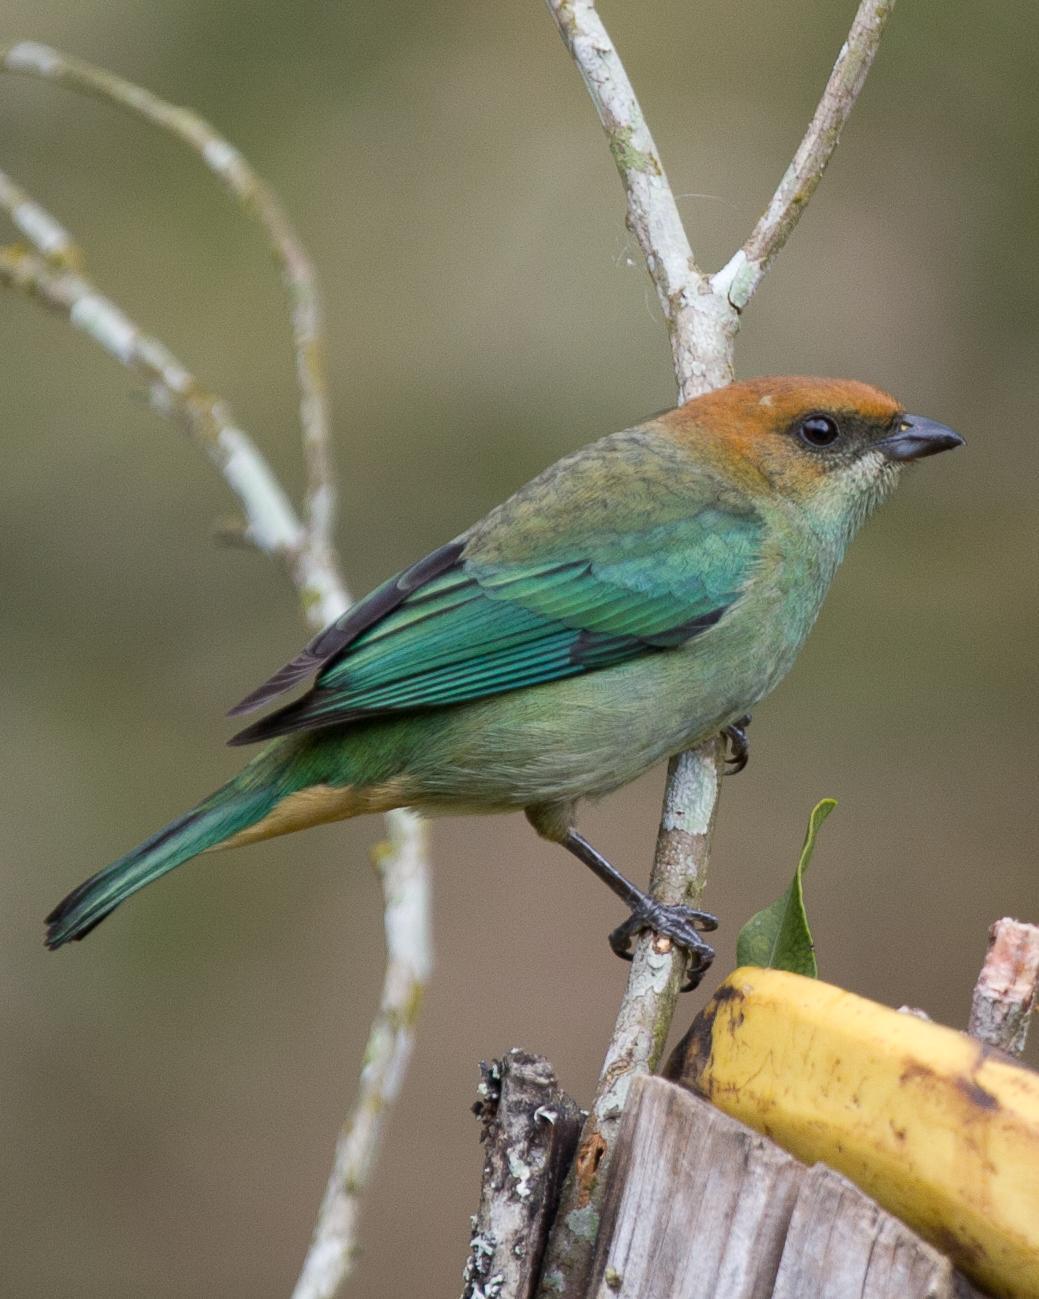 Chestnut-backed Tanager Photo by Robert Lewis